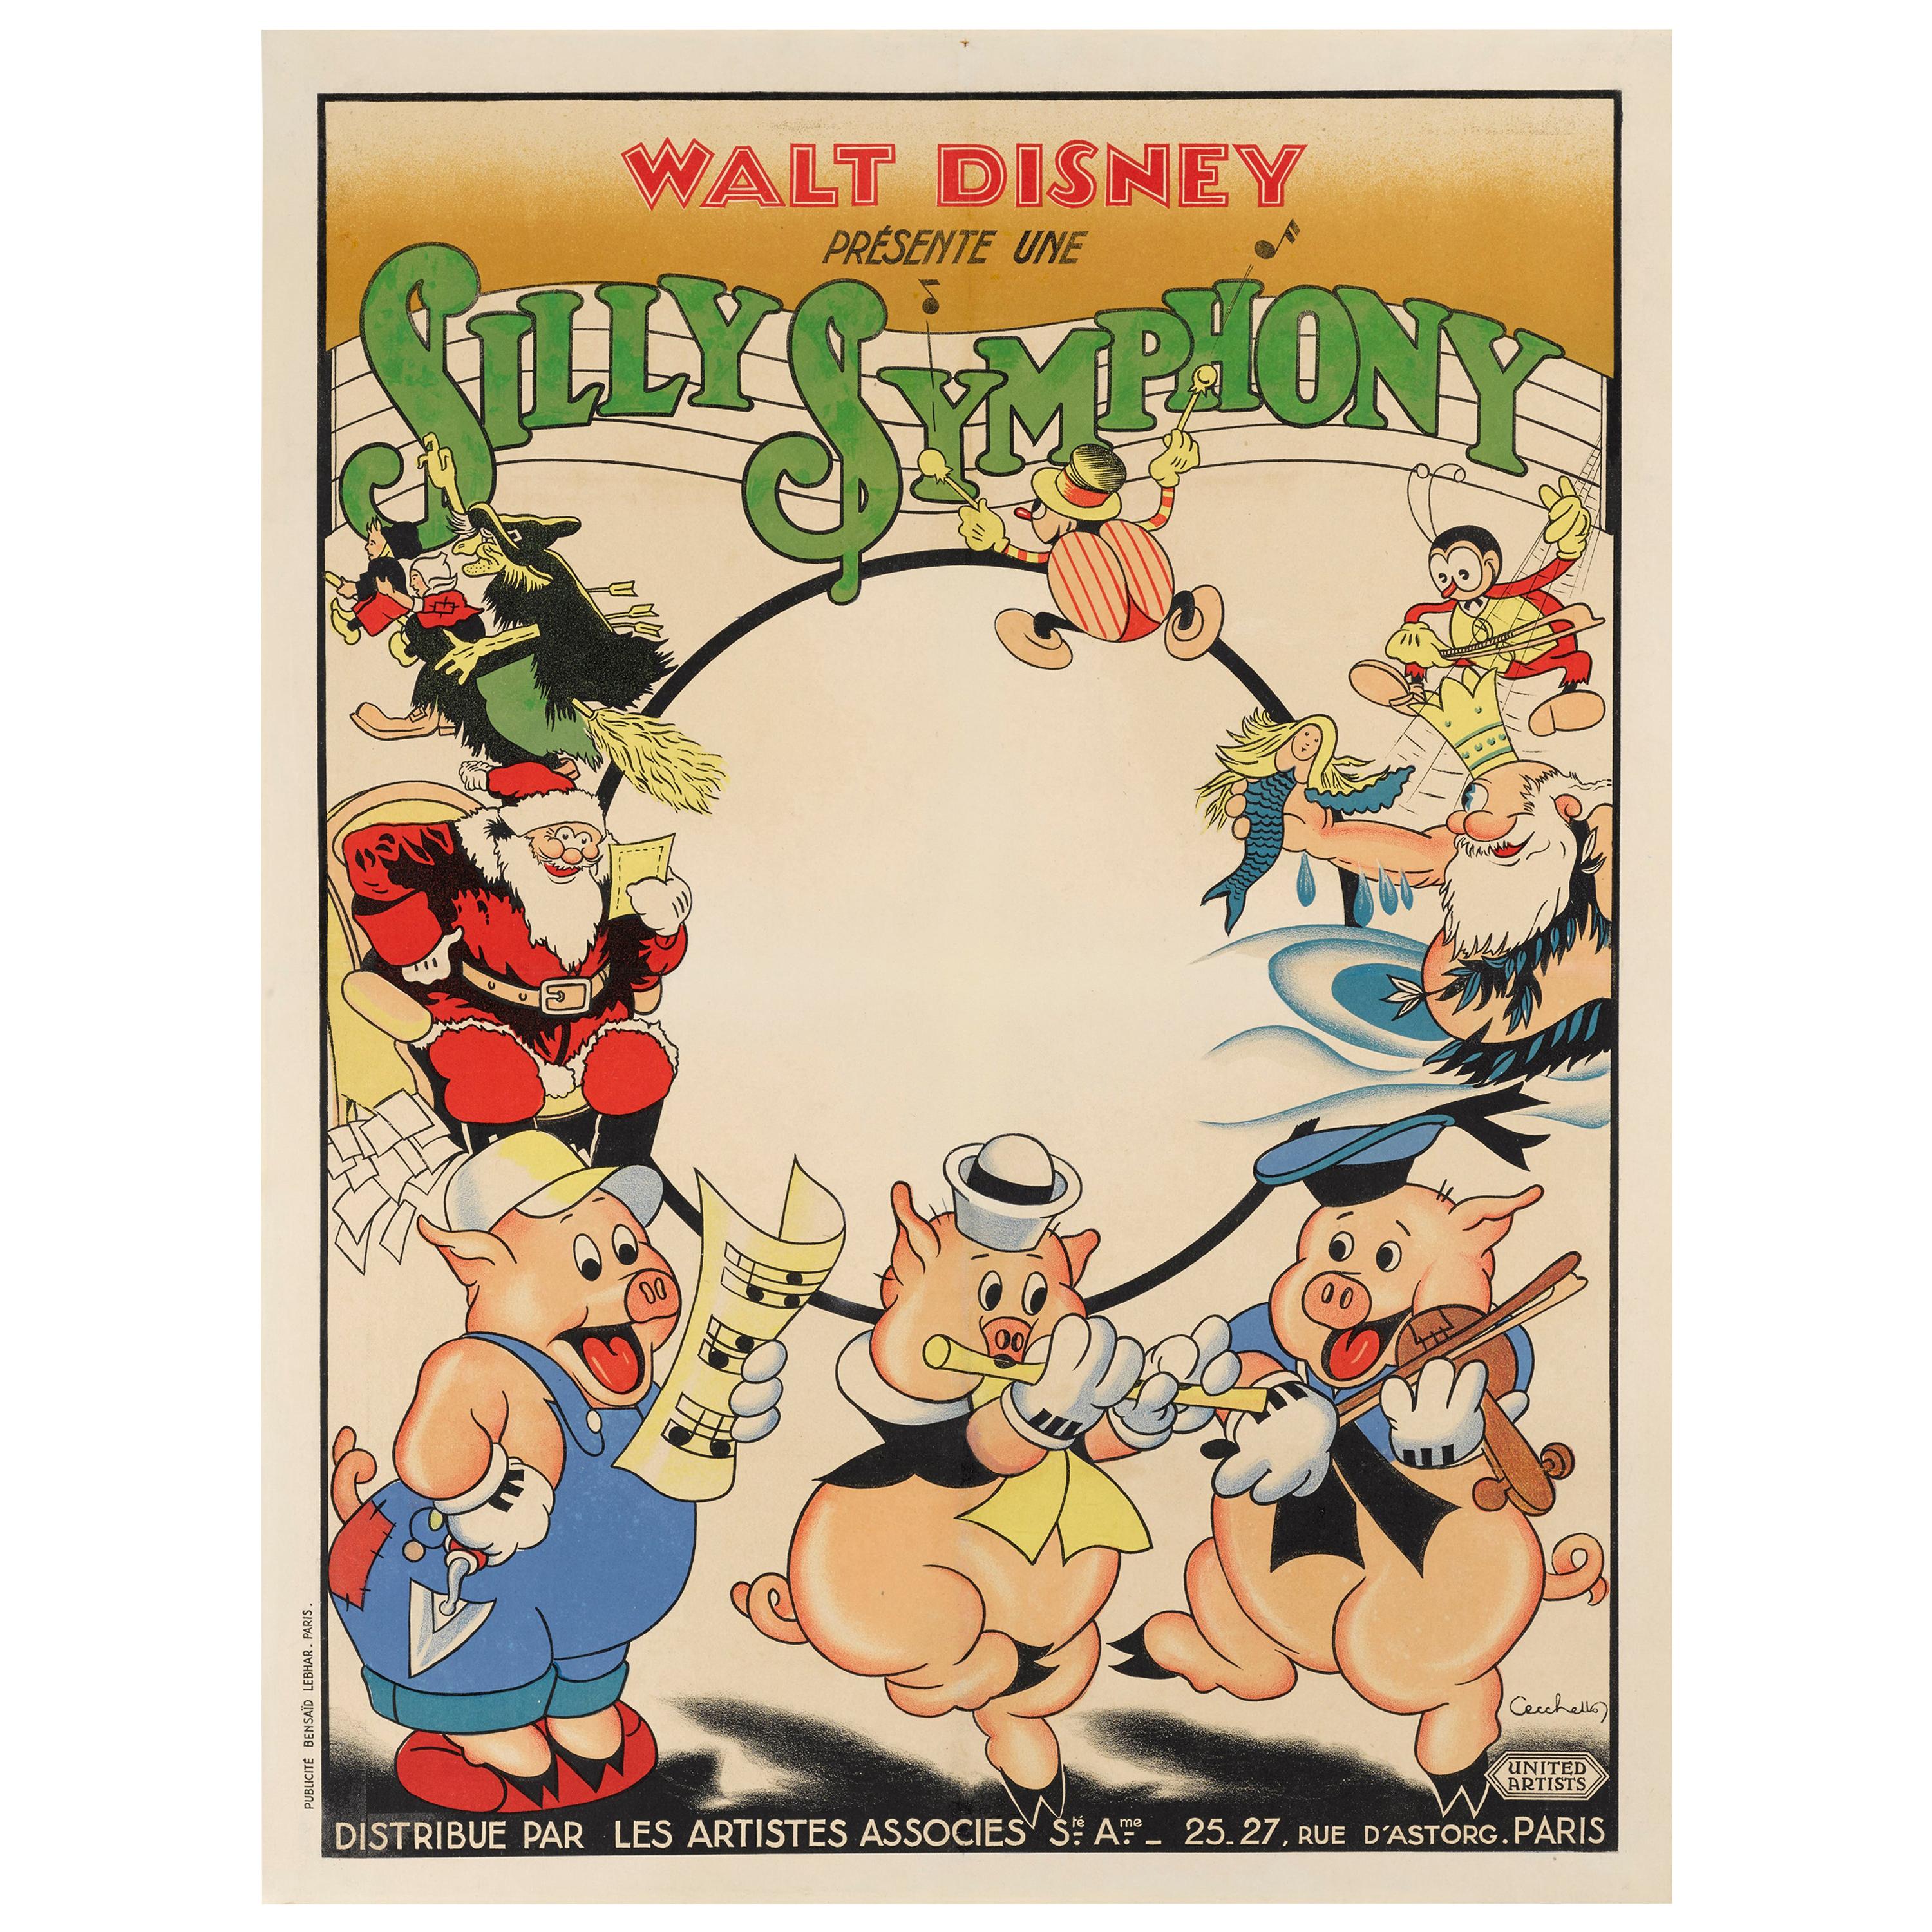 Silly Symphony For Sale